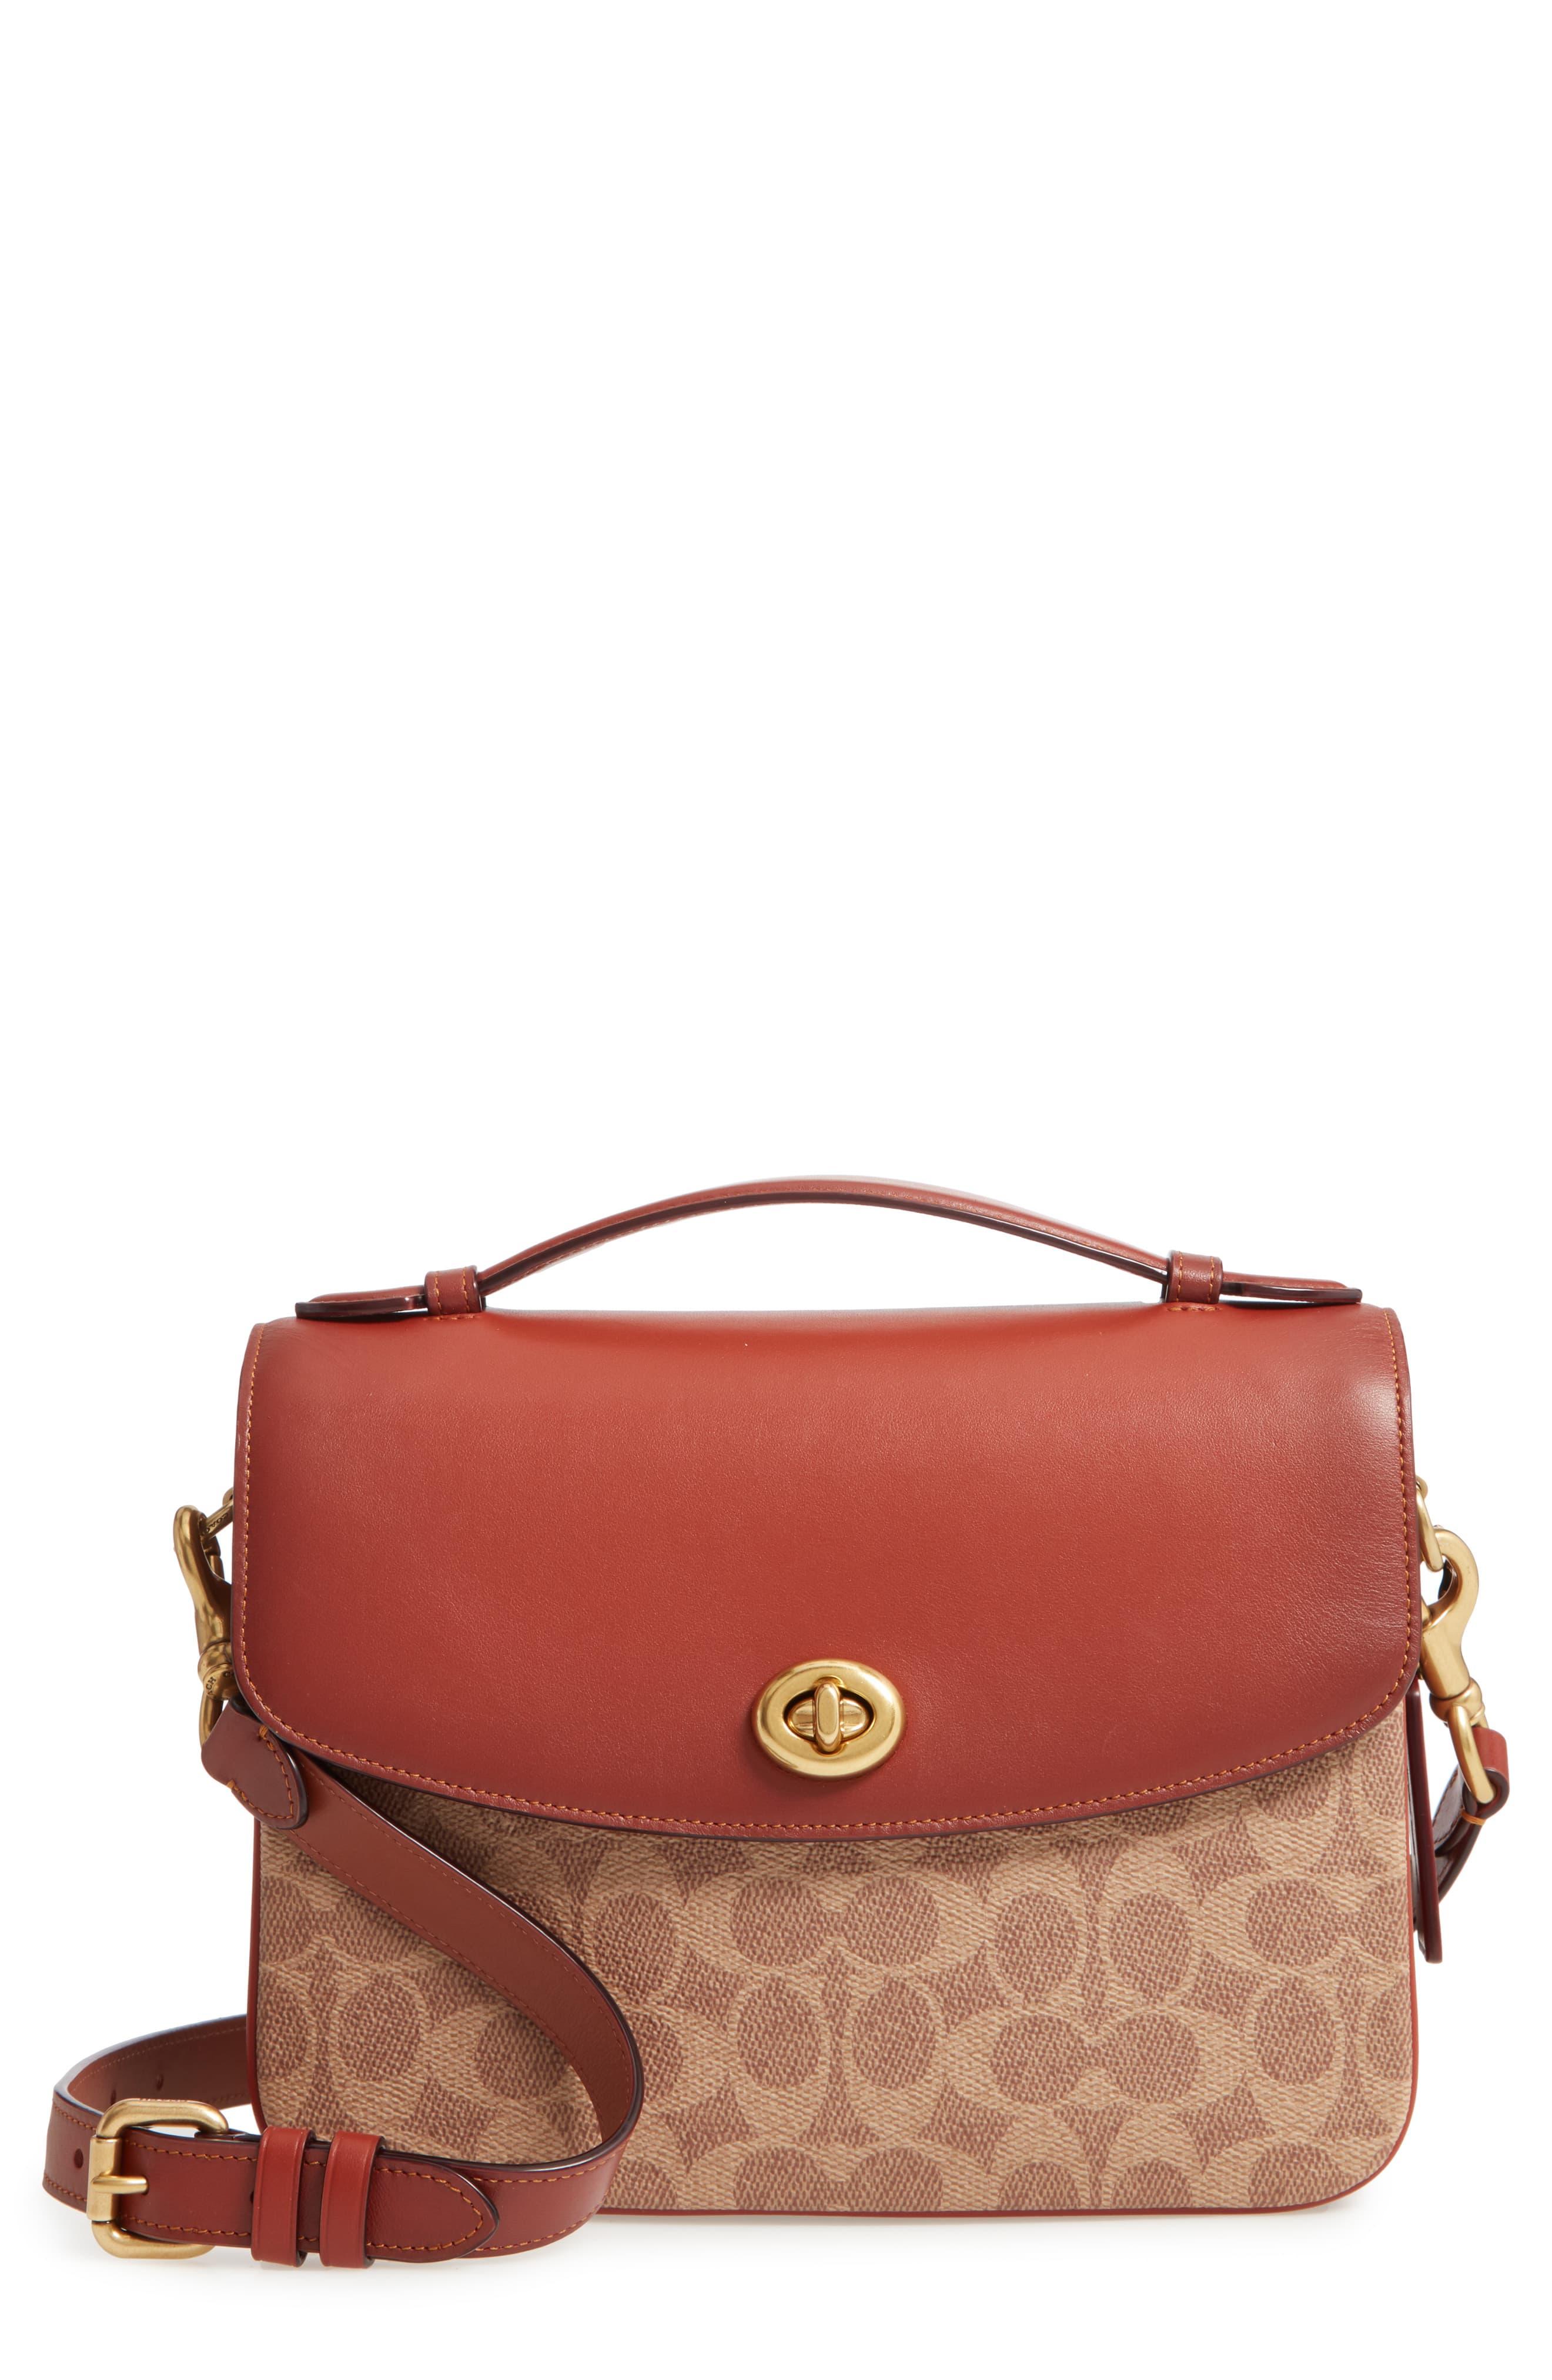 COACH Chaise Signature Canvas & Leather Crossbody Bag - in Red - Lyst